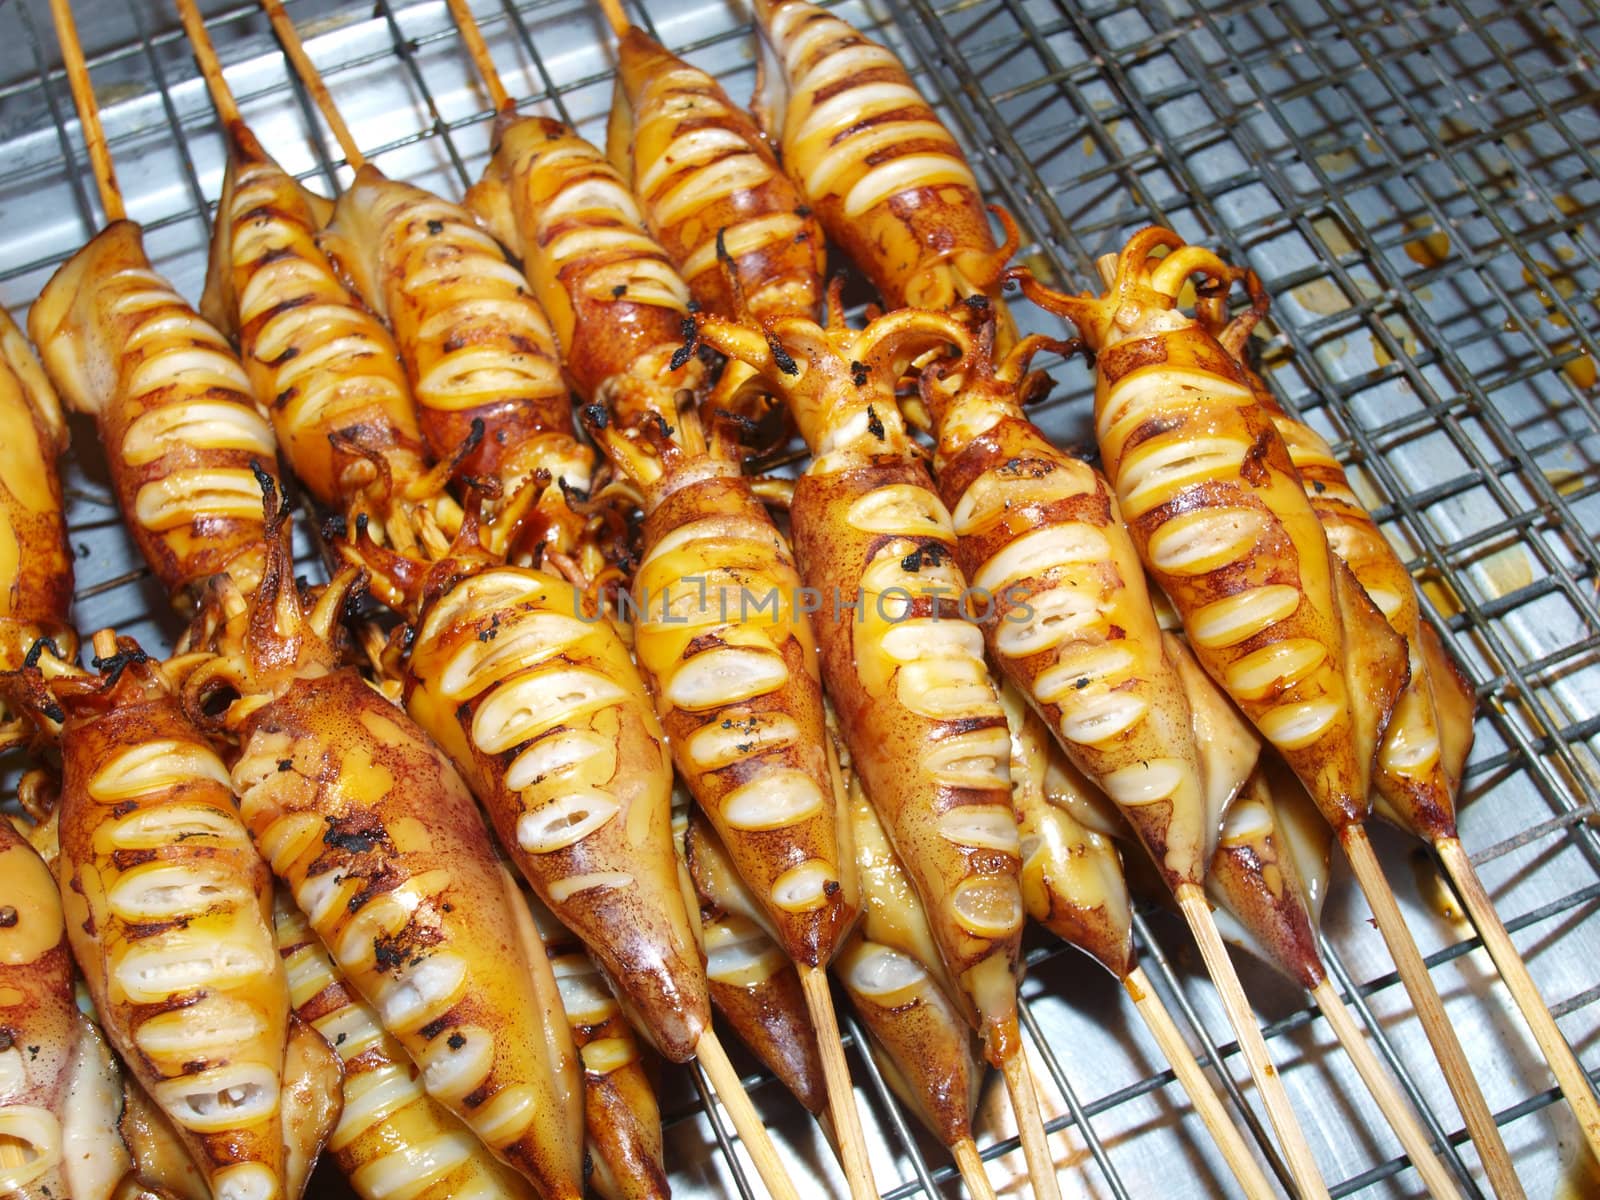 Many of grilled squid in thai market